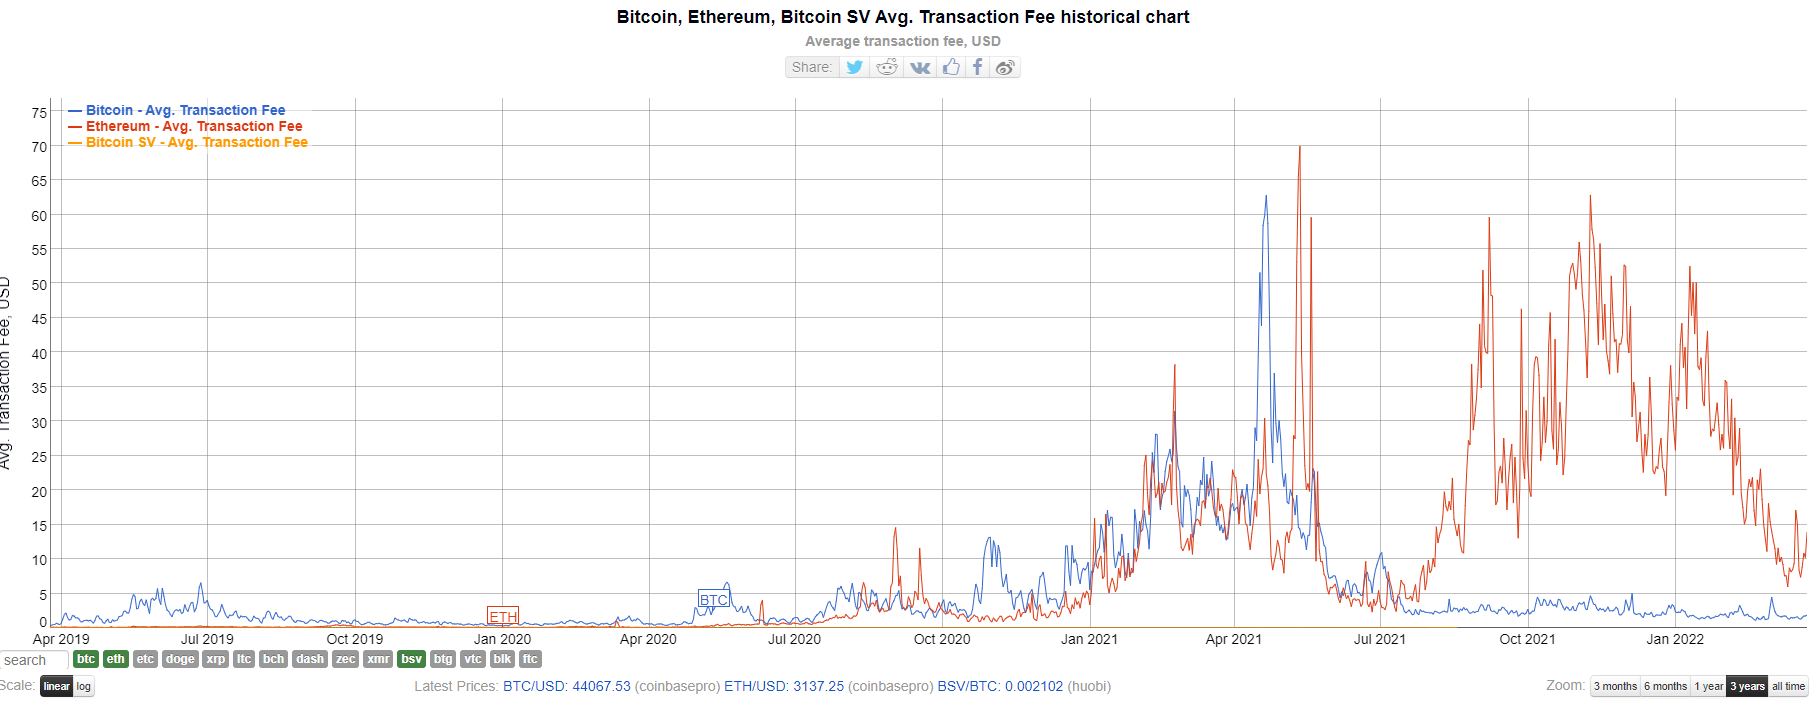 graph's base of BSV and other coins